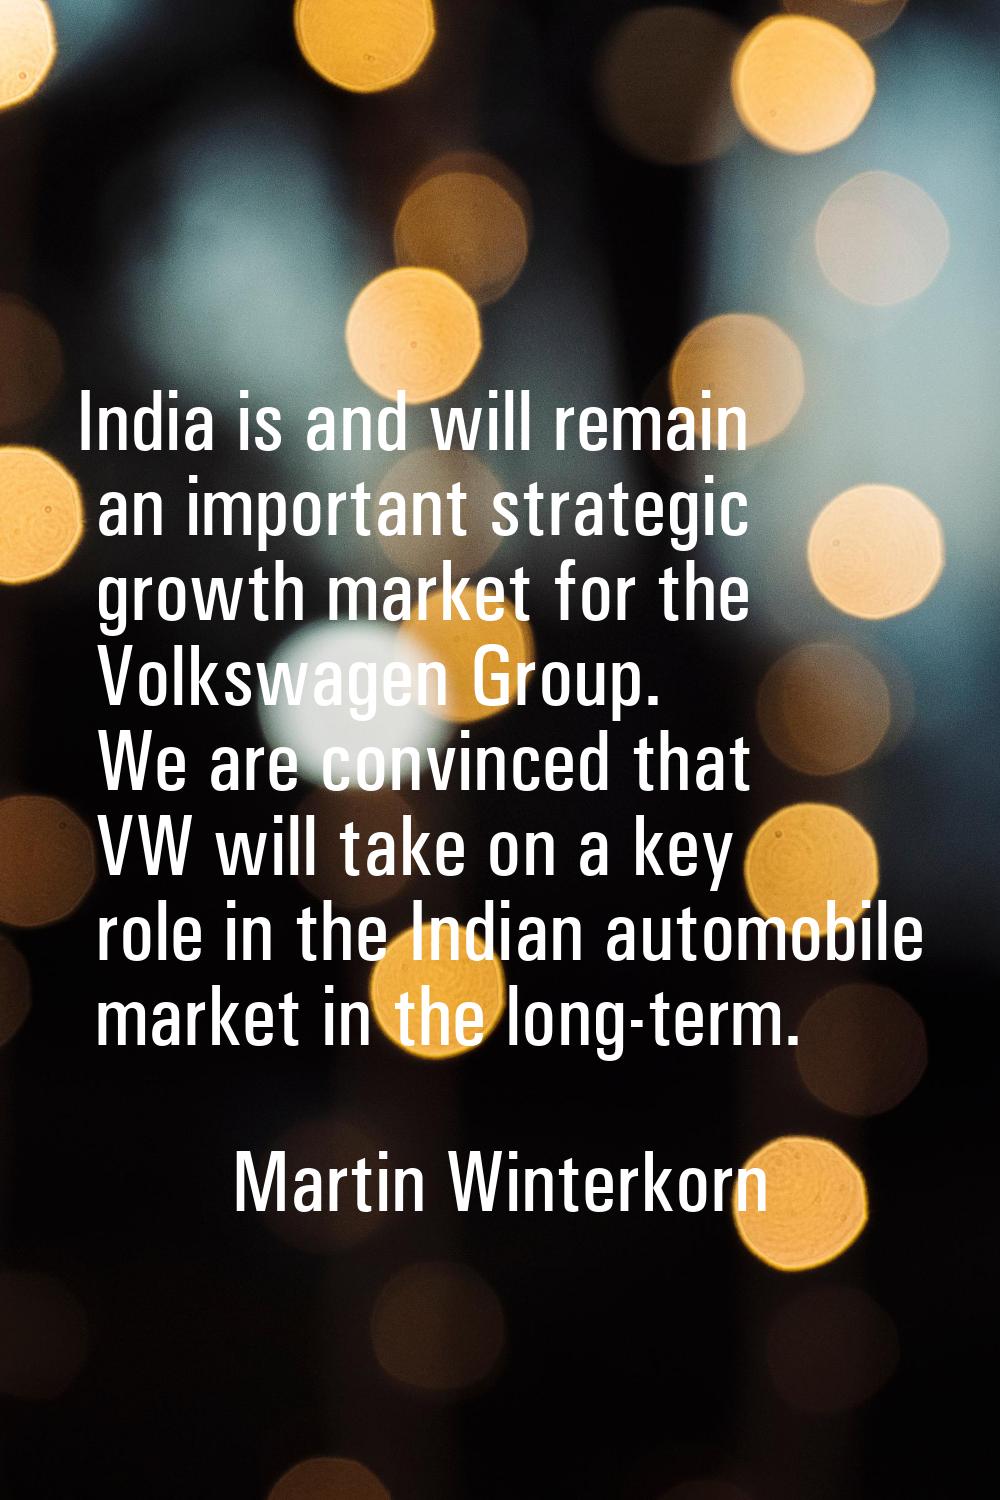 India is and will remain an important strategic growth market for the Volkswagen Group. We are conv